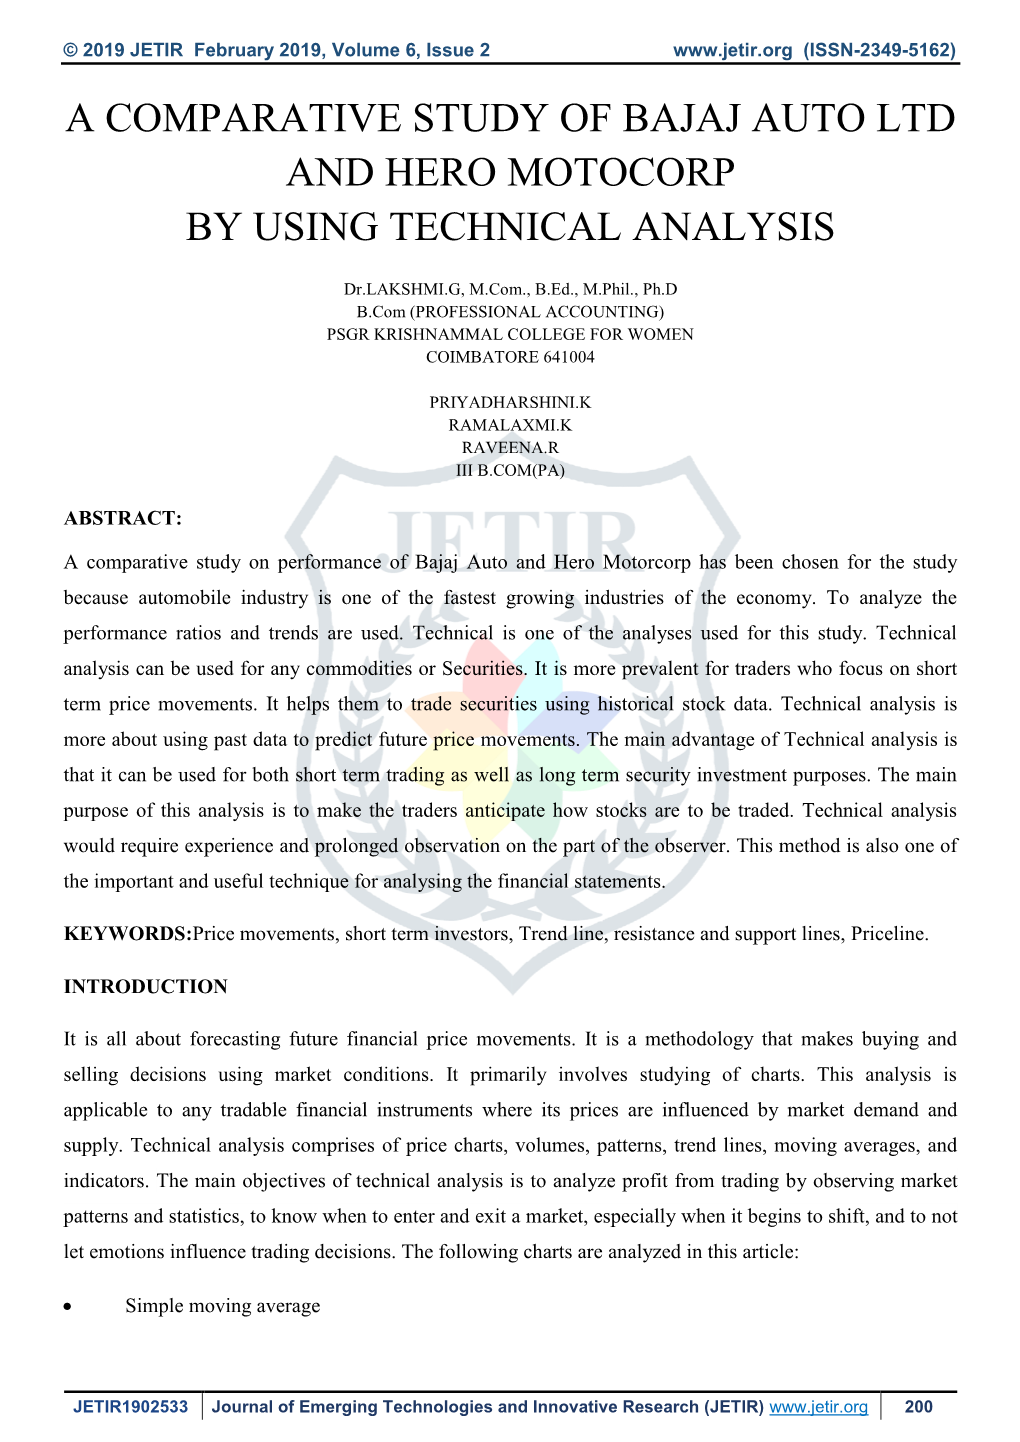 A Comparative Study of Bajaj Auto Ltd and Hero Motocorp by Using Technical Analysis